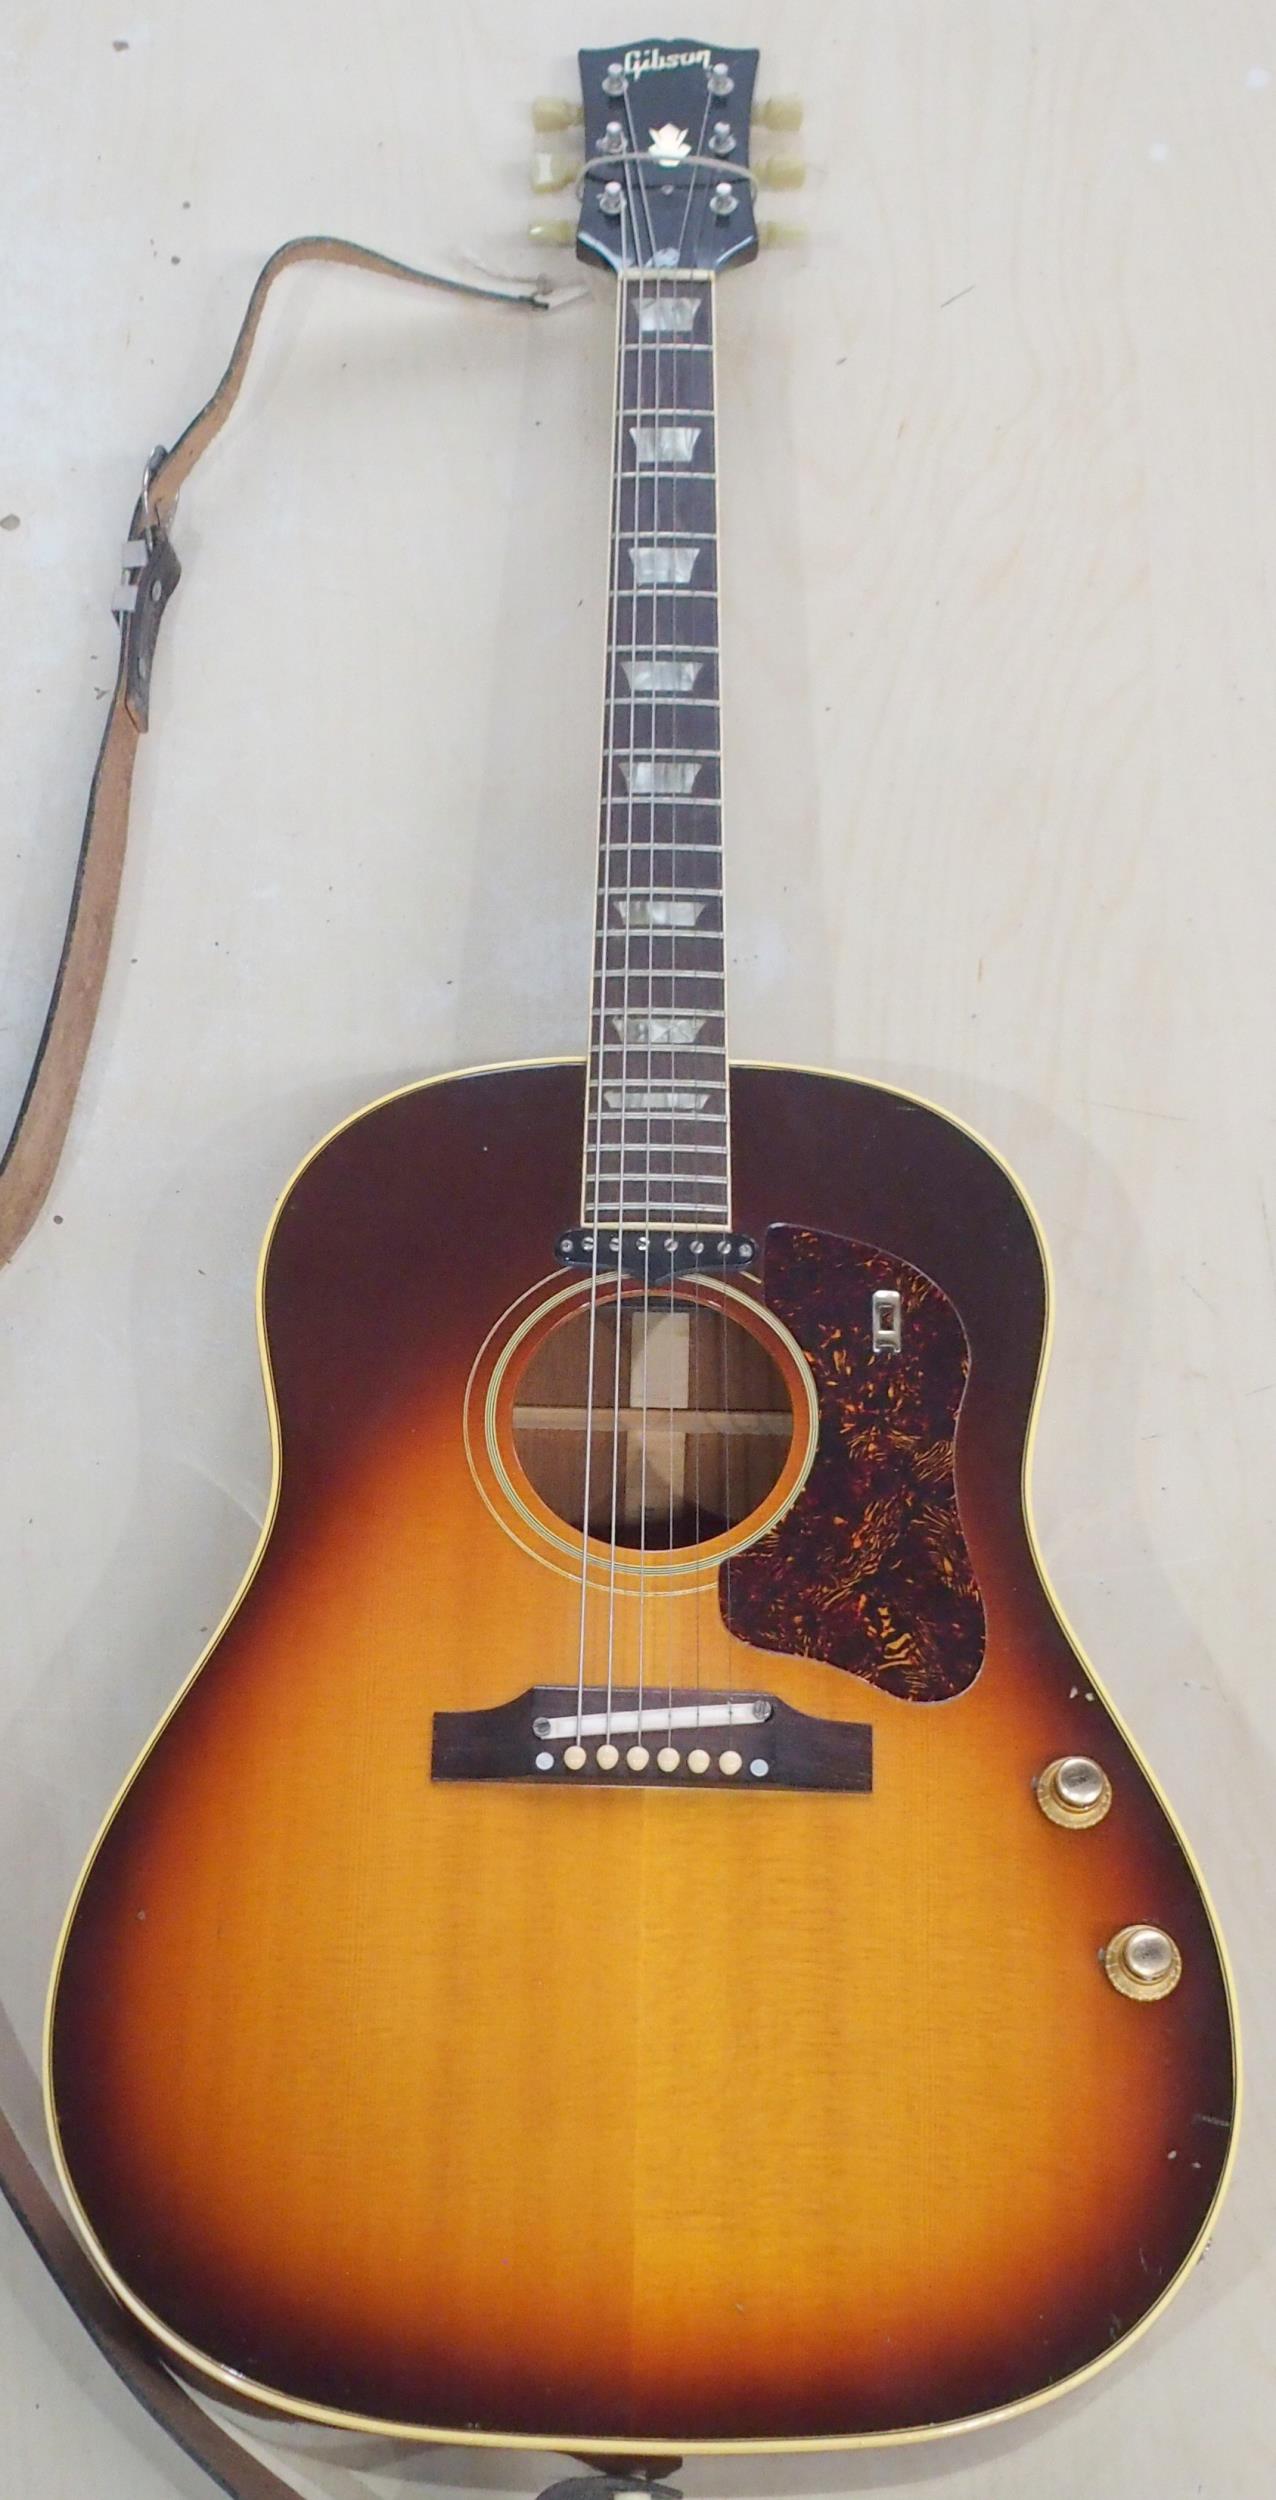 GIBSON a Gibson J160E electro acoustic guitar in dark sunburst serial number 890922 circa 1969 - Image 3 of 39